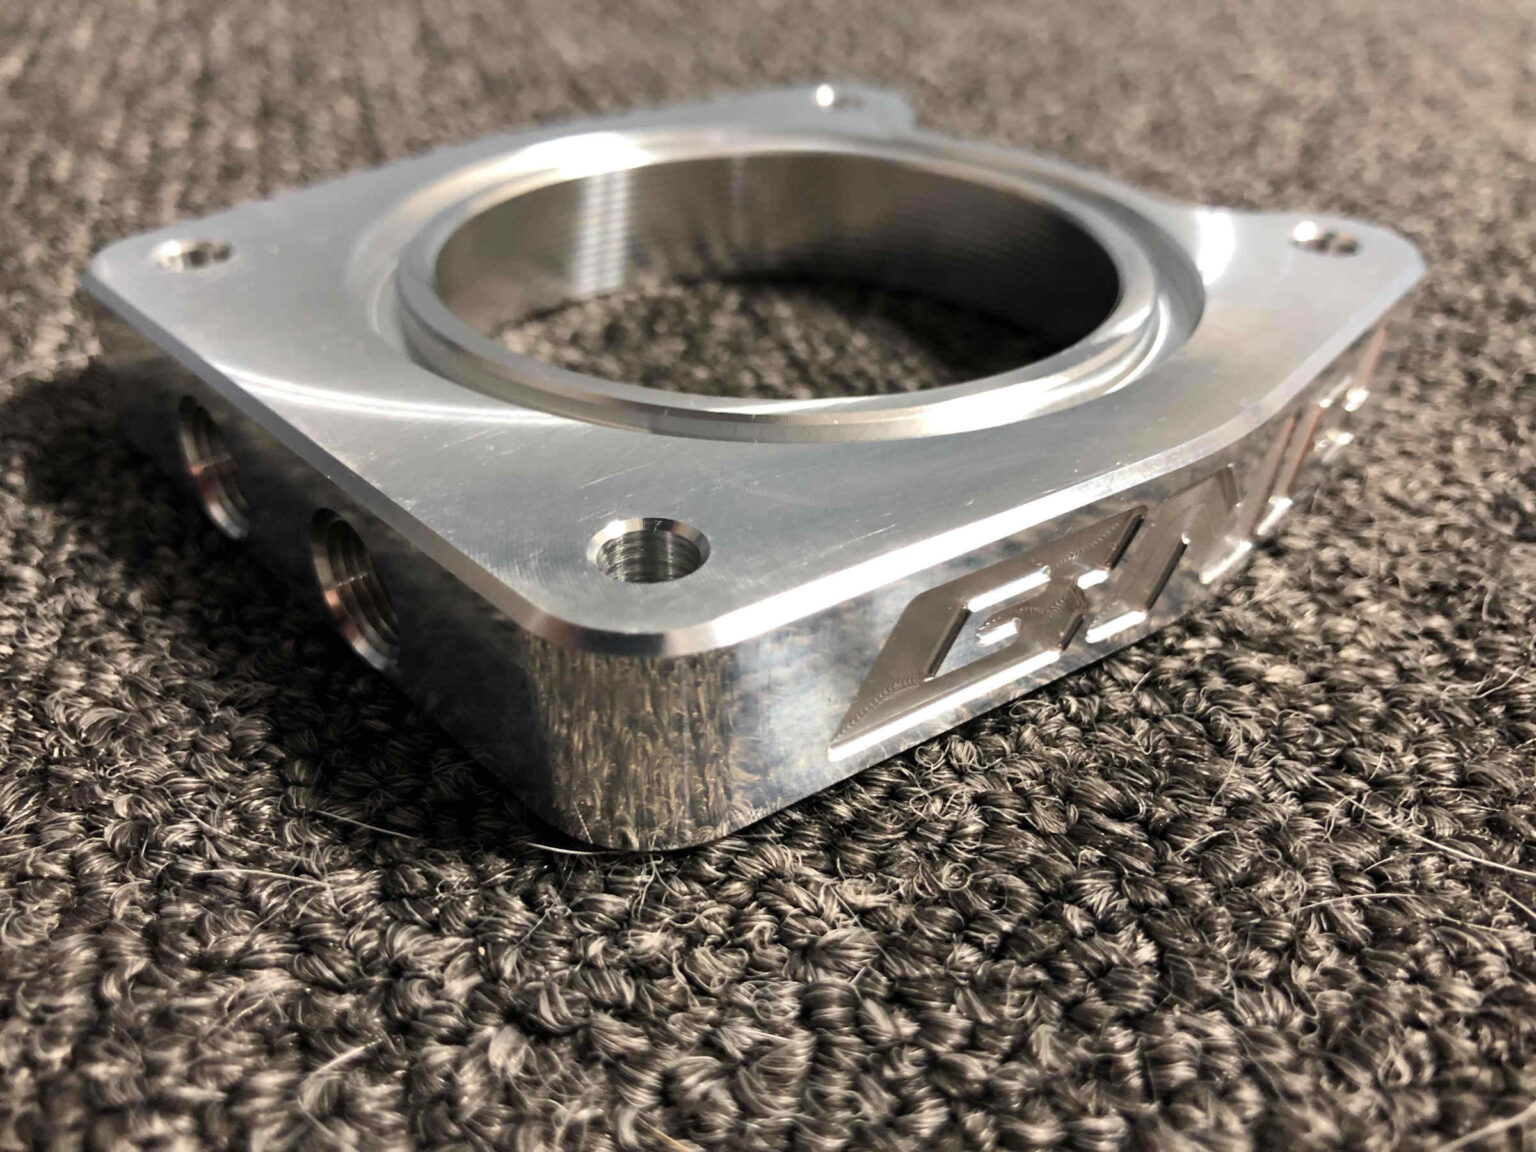 If you want to know about throttle body spacer, you can visit the site of CarExpertGroup. You can also read this guide that provides you with detailed information about the pros and cons of throttle body spacer.